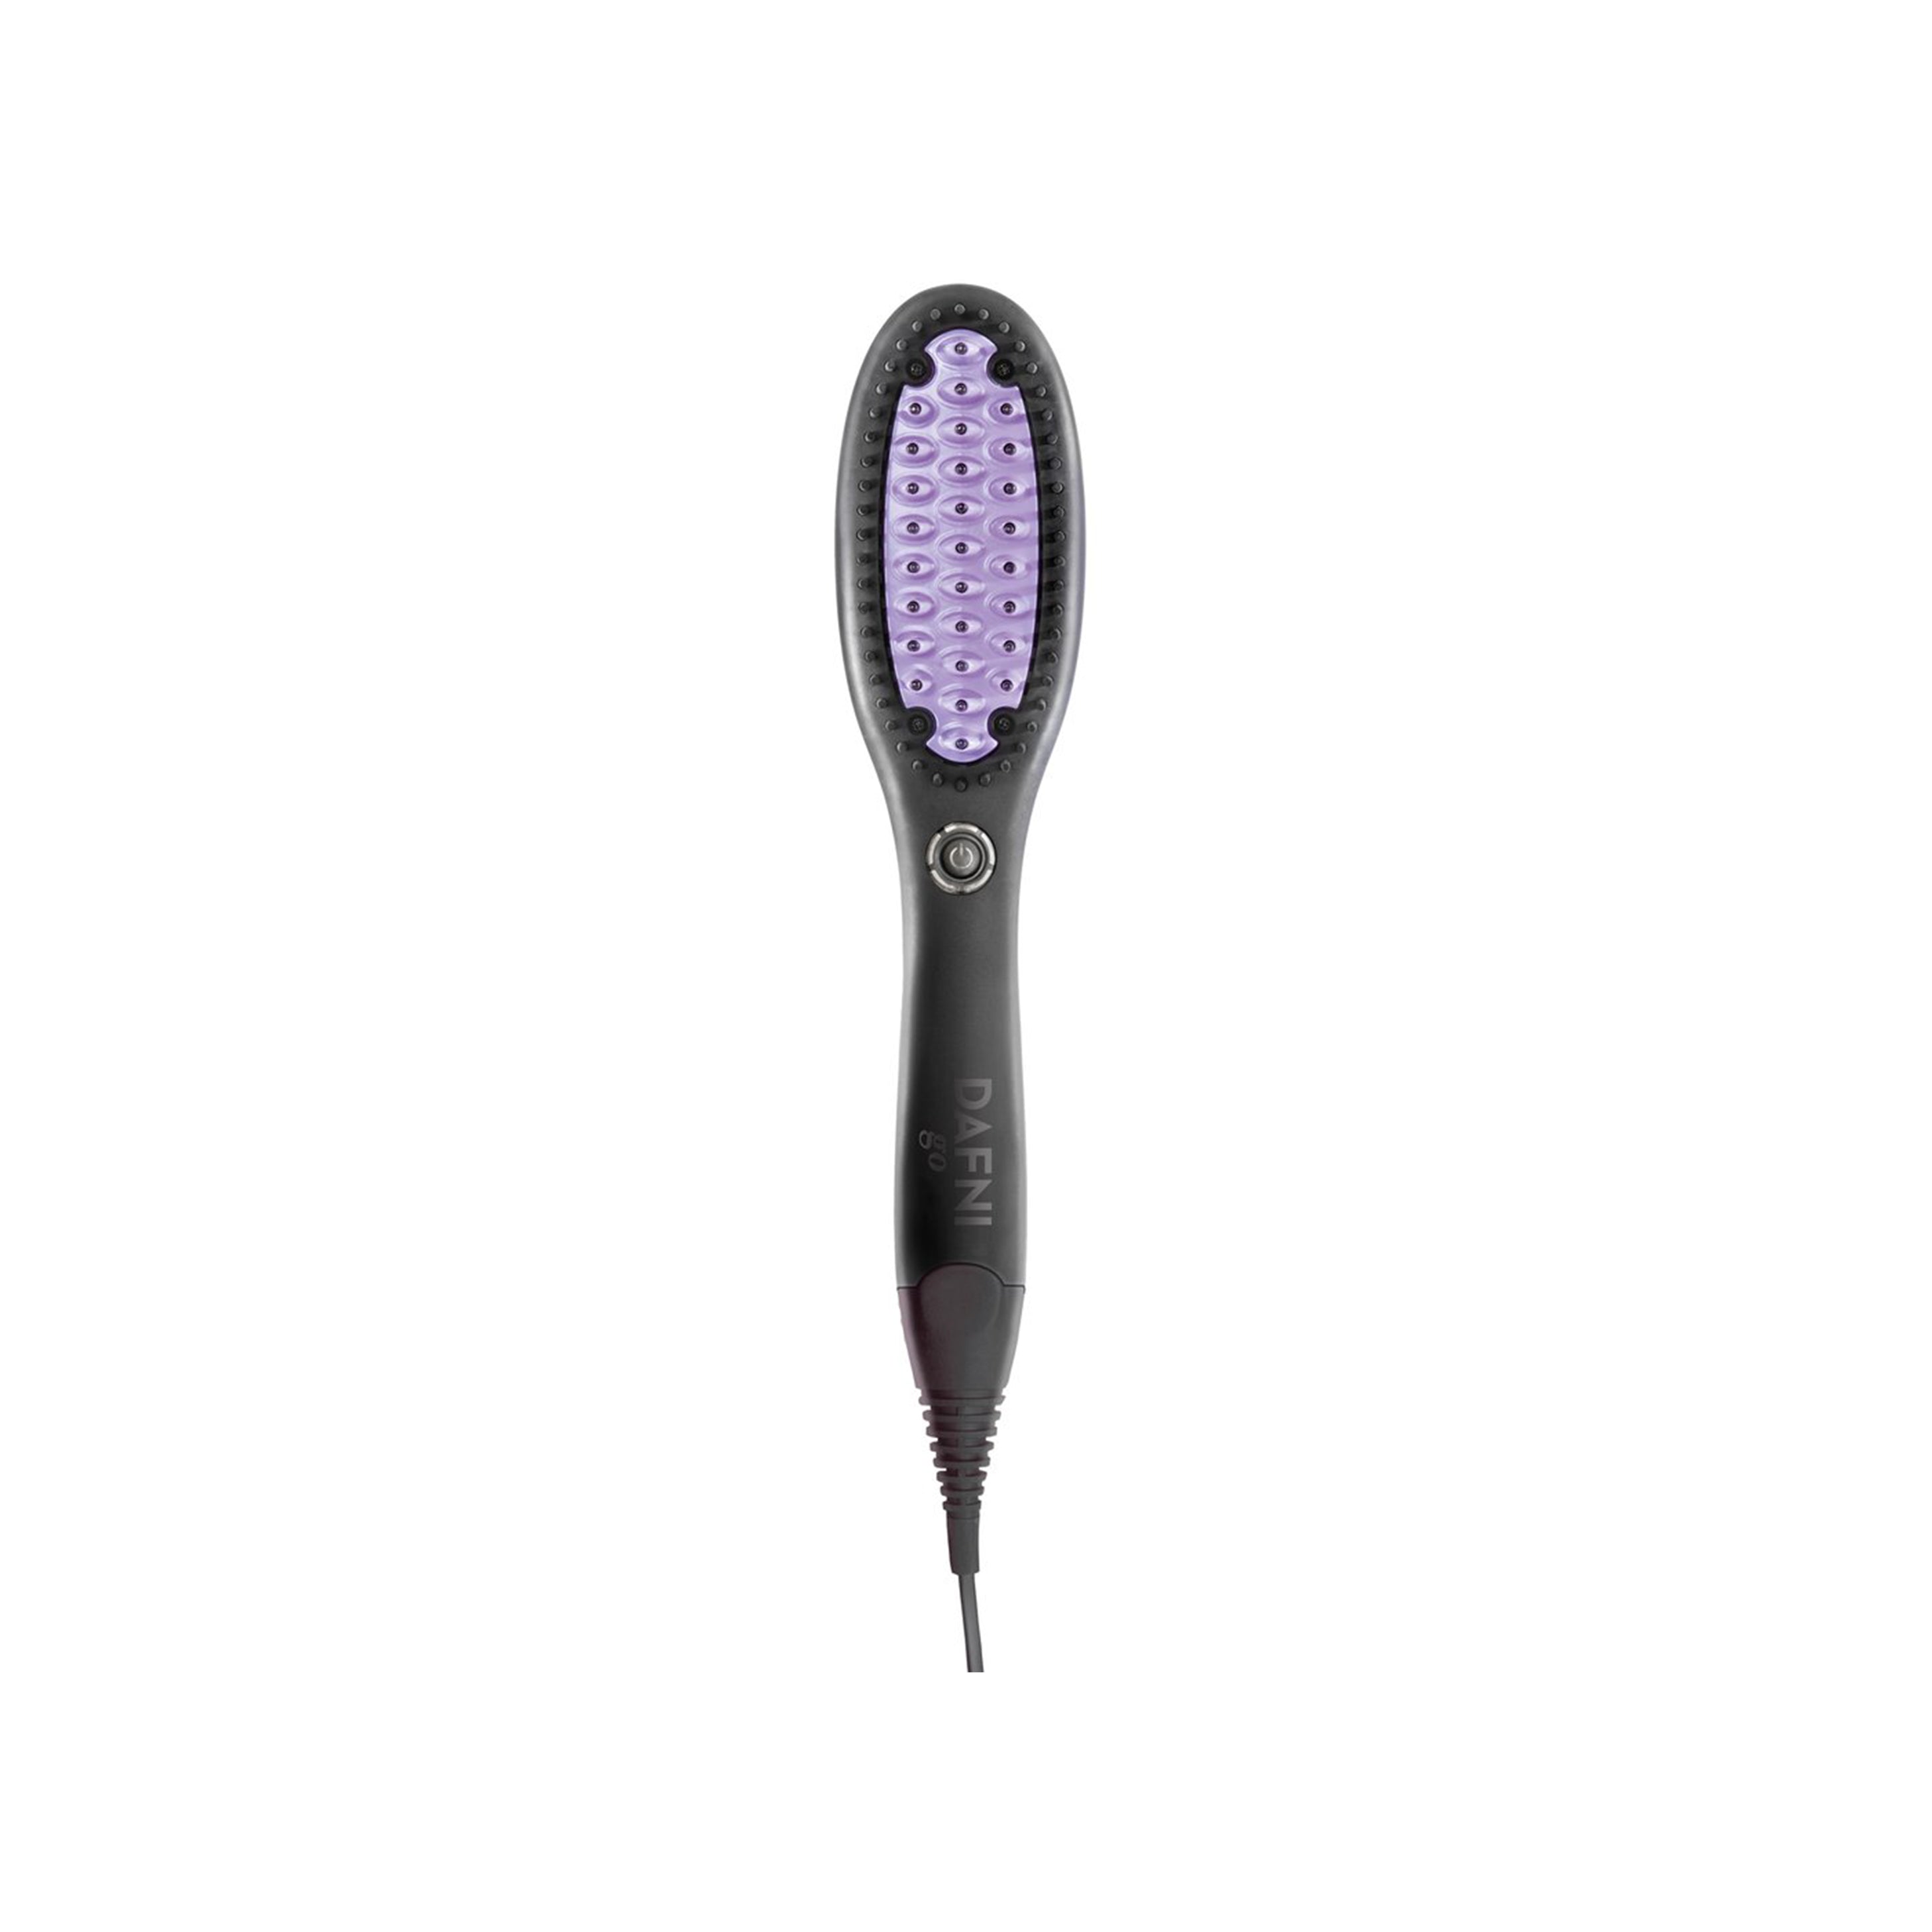 DAFNI The Original Hair Straightening Ceramic Brush  Styles Hair Up to 10  Times Faster Than a Flat Iron  Amazonin Beauty